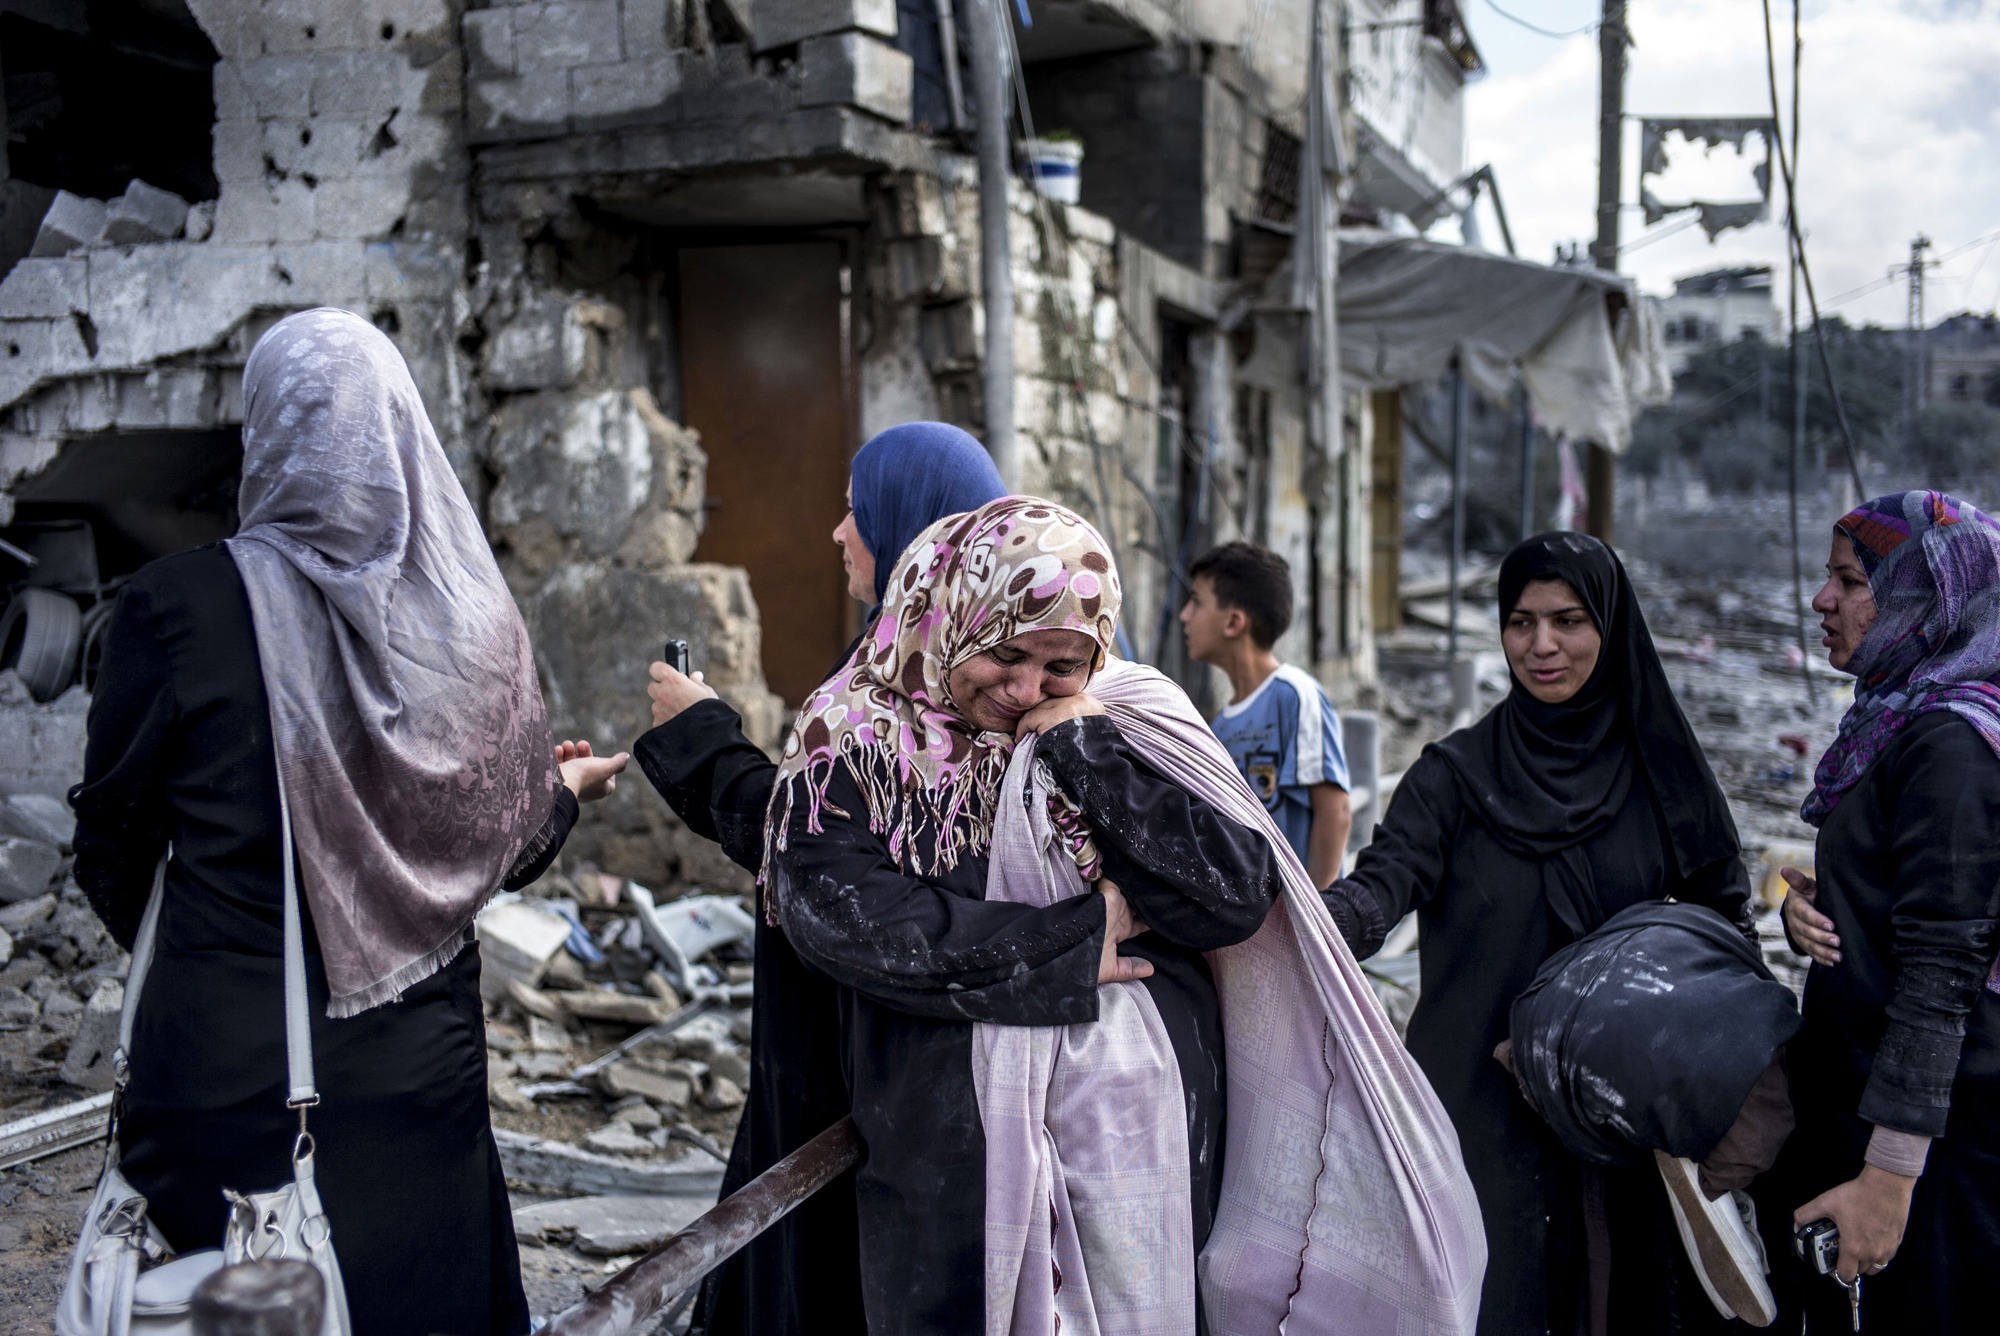 Palestinian women react amid the destruction in the northern district of Beit Hanun in the Gaza Strip during an humanitarian truce on July 26, 2014.